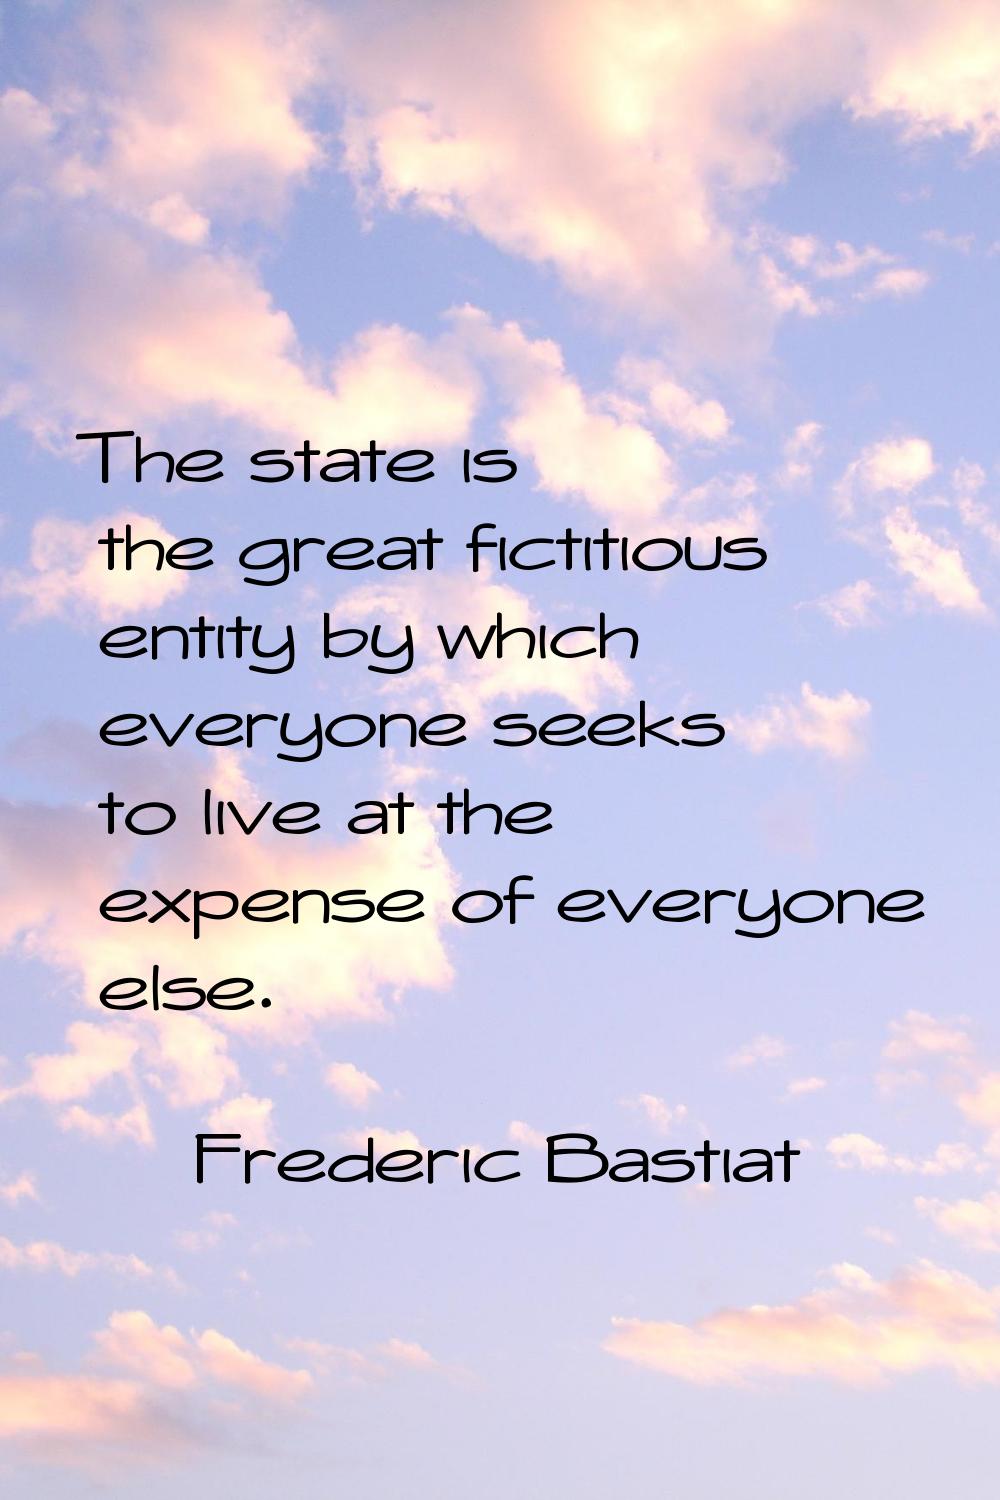 The state is the great fictitious entity by which everyone seeks to live at the expense of everyone